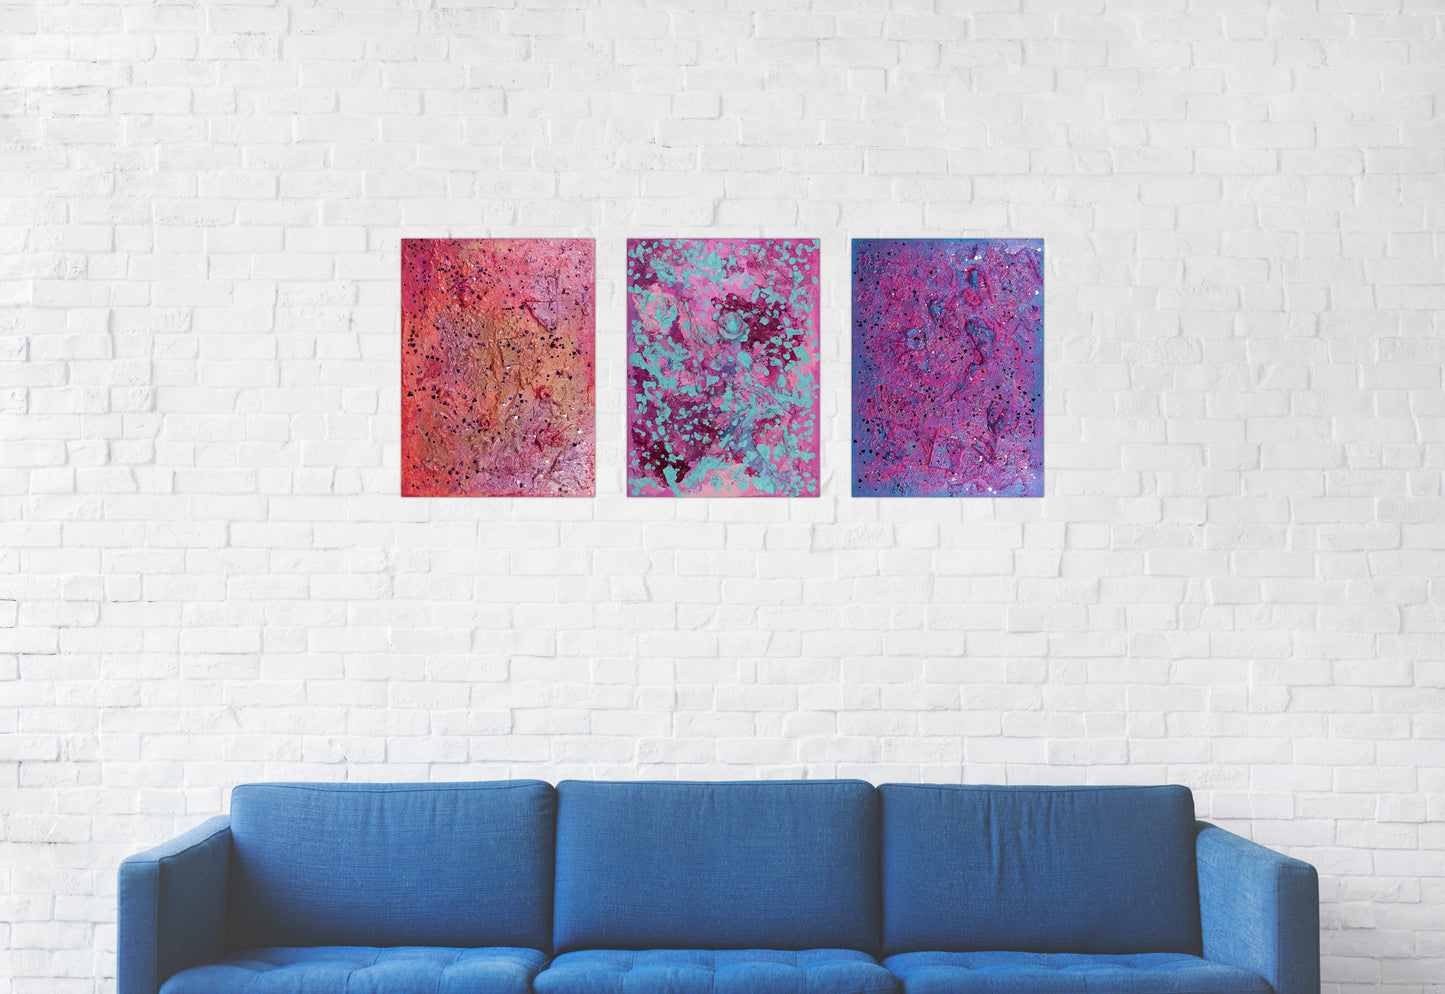 Pink Obsessed : 16" x 35" - 40 x 90 cm